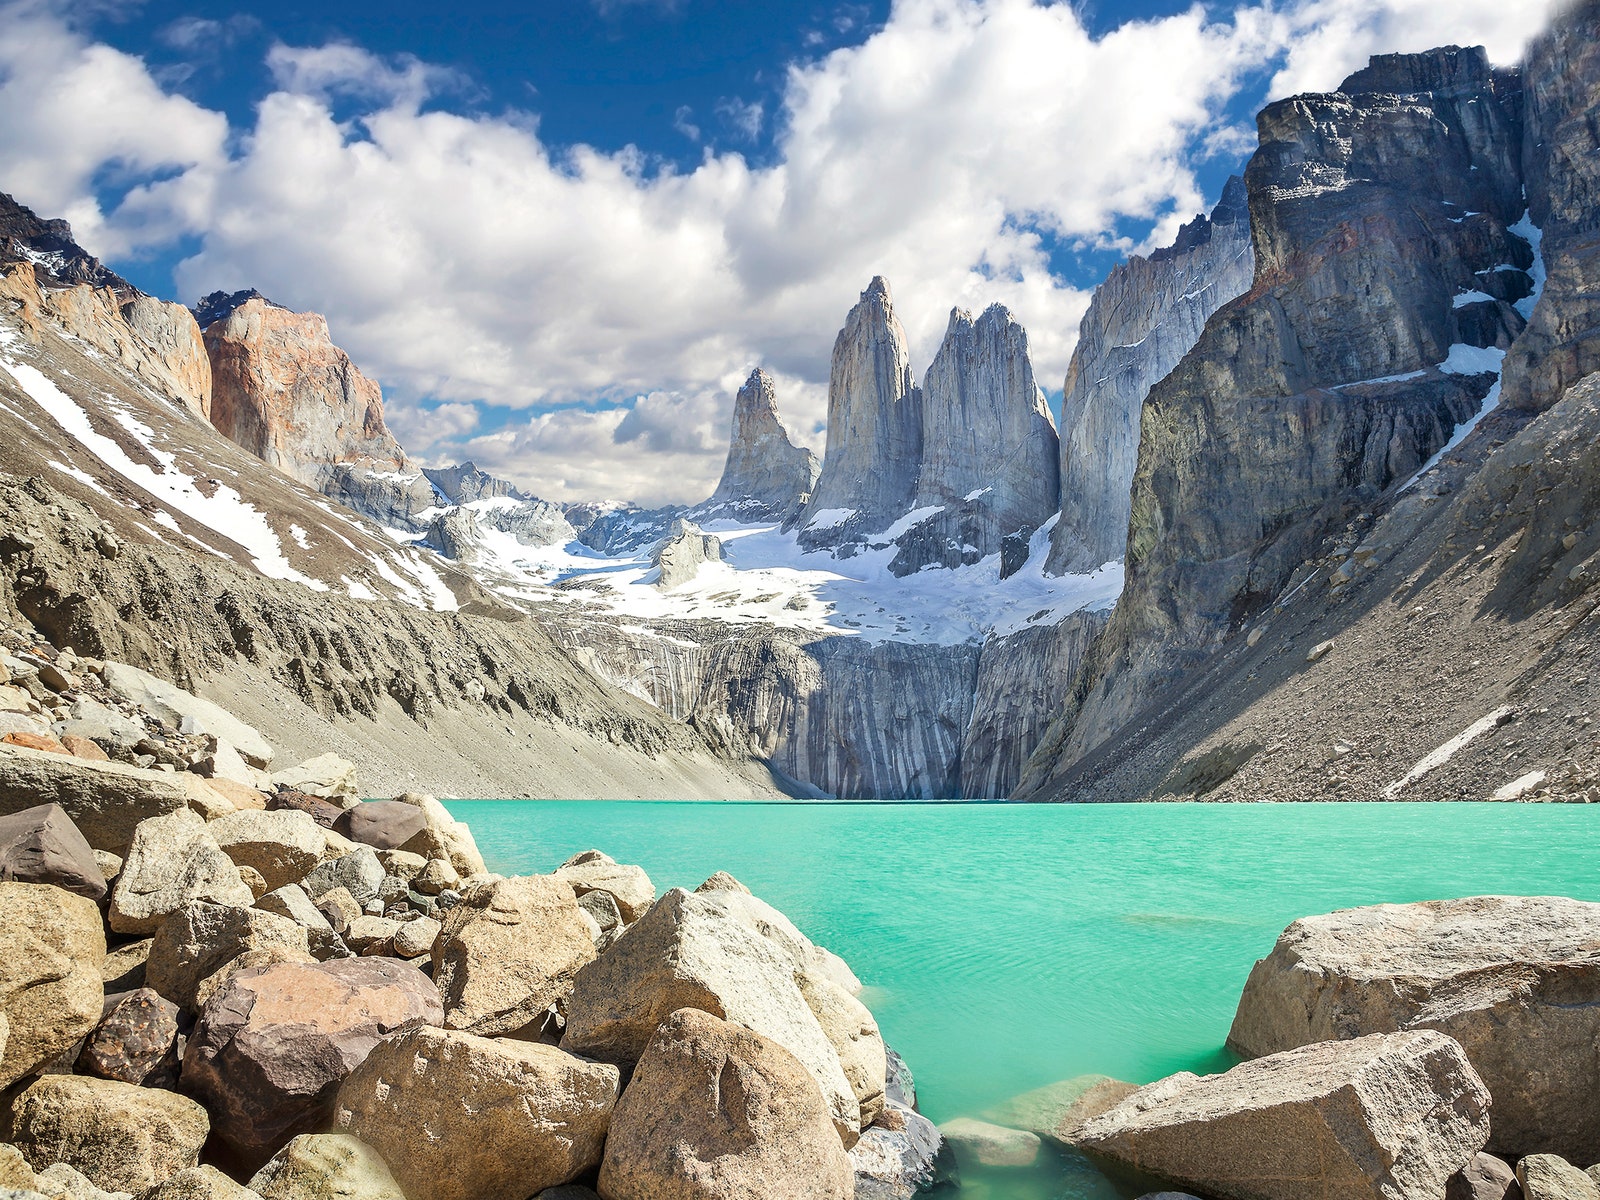 Do You Have the Smarts to Get an ‘A’ On This Geography Test? Chile